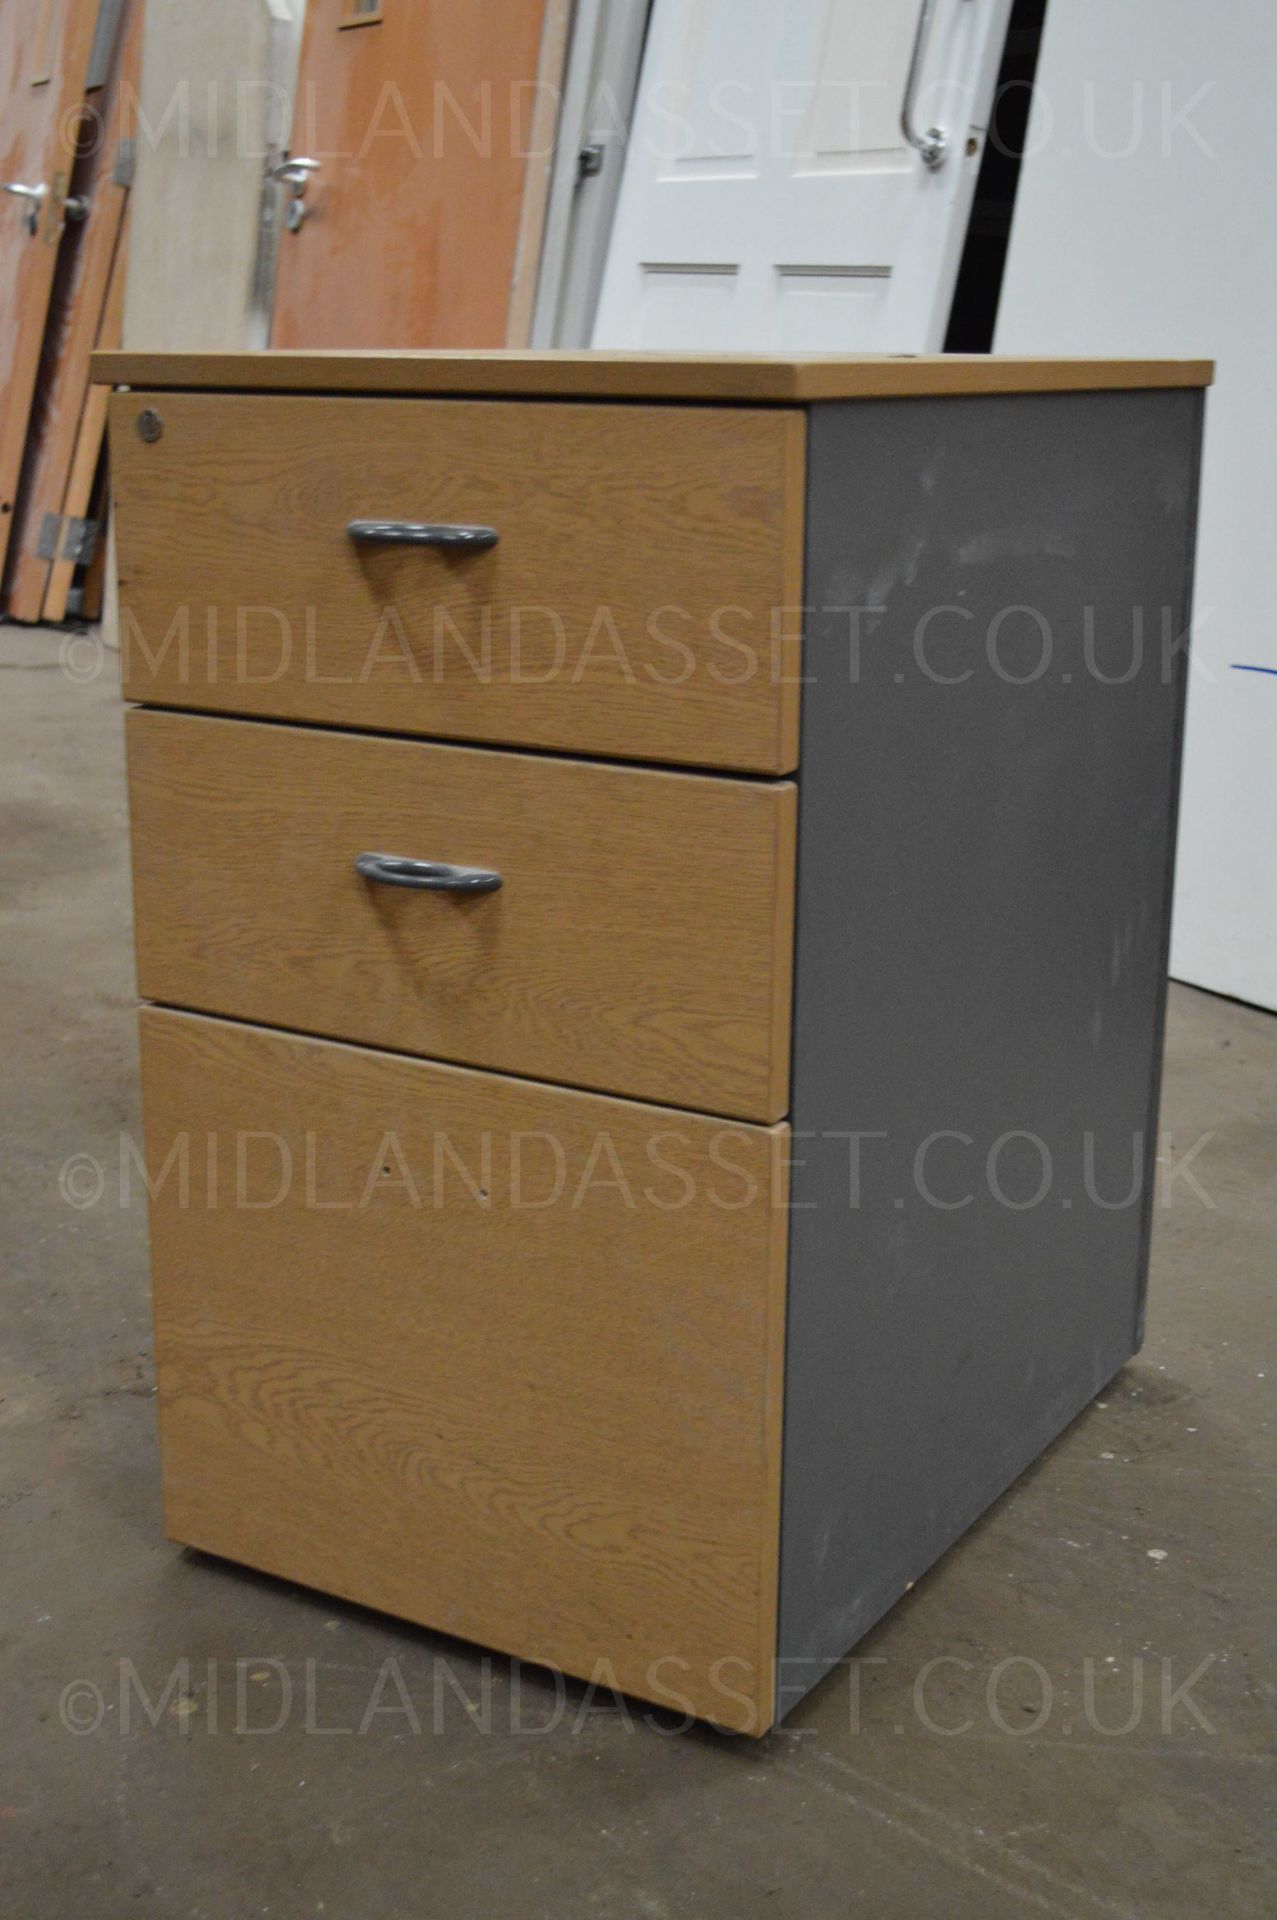 OAK OFFICE DRAWERS WITH WHEELS - USED CONDITION